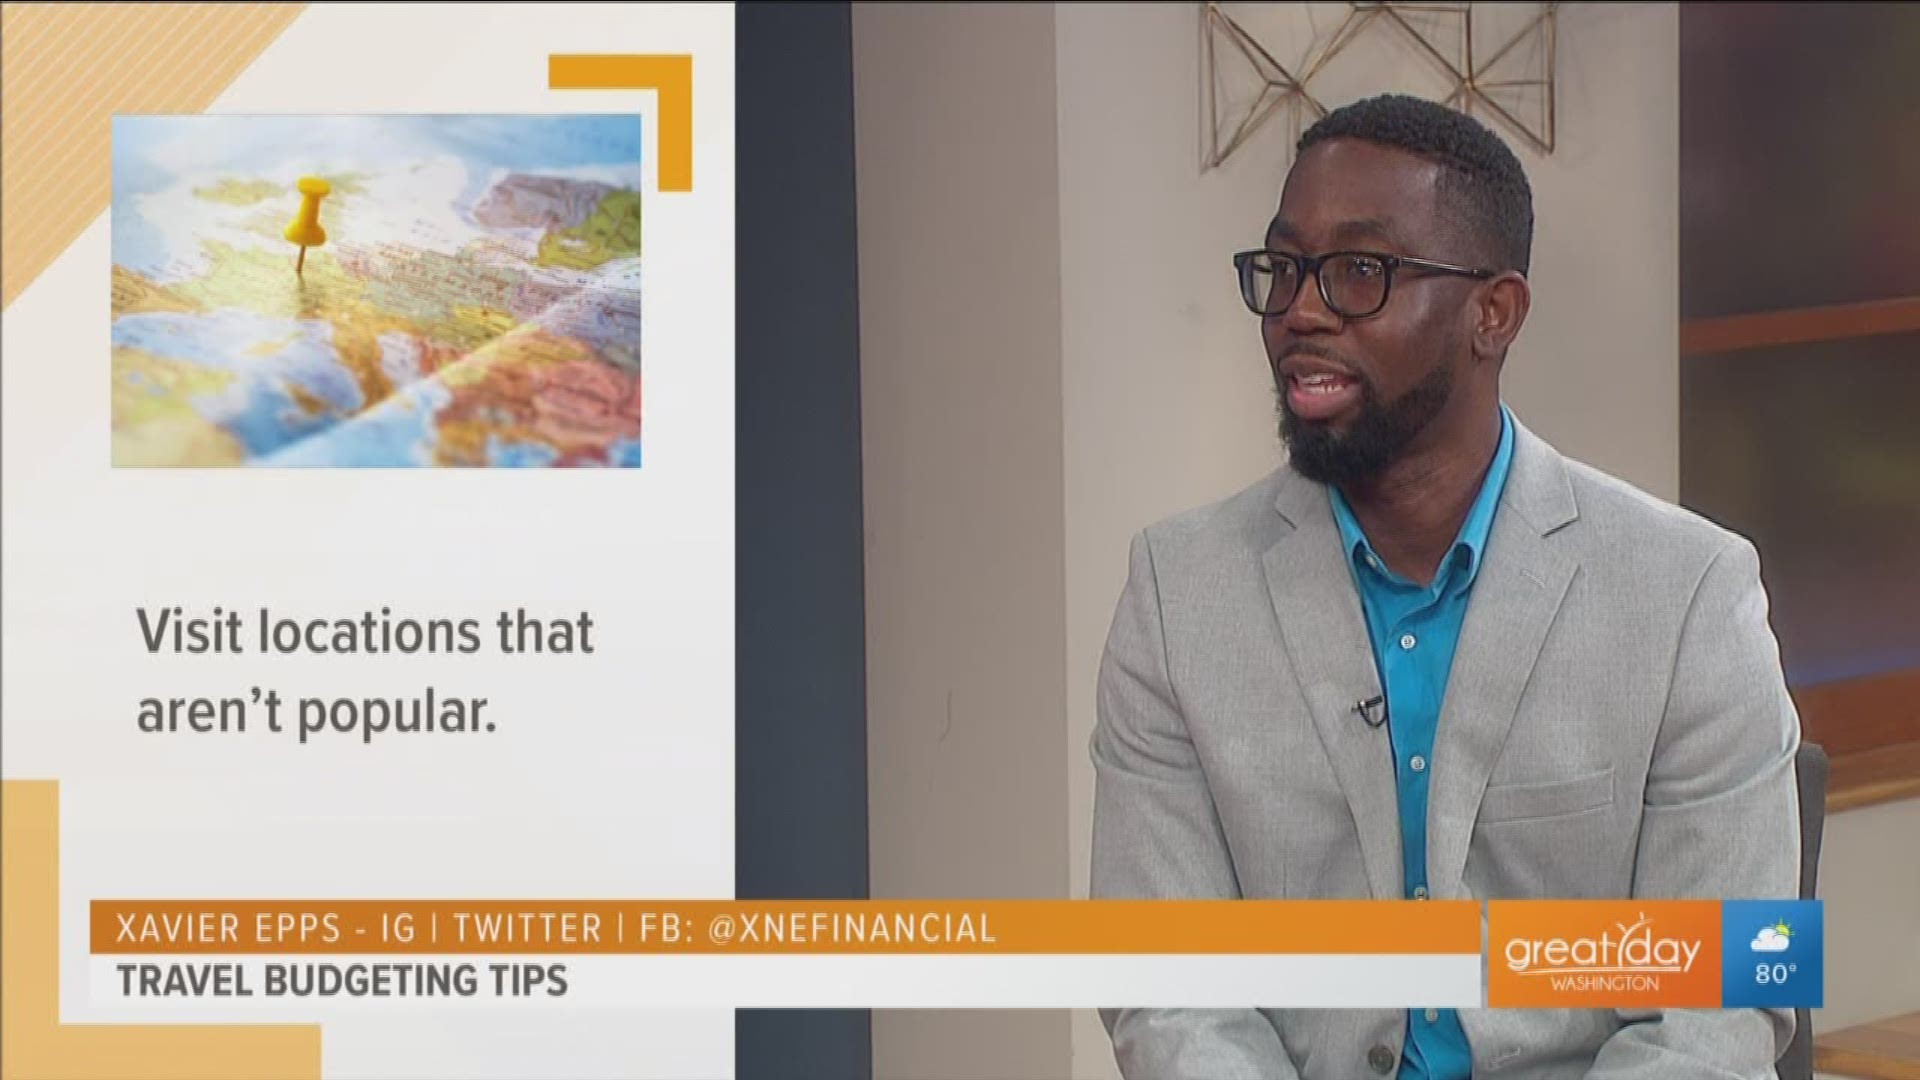 Traveling can become quite expensive once all factors are added in. However, financial guru Xavier Epps provided us a few helpful tips for those traveling this summer or later on in the year.